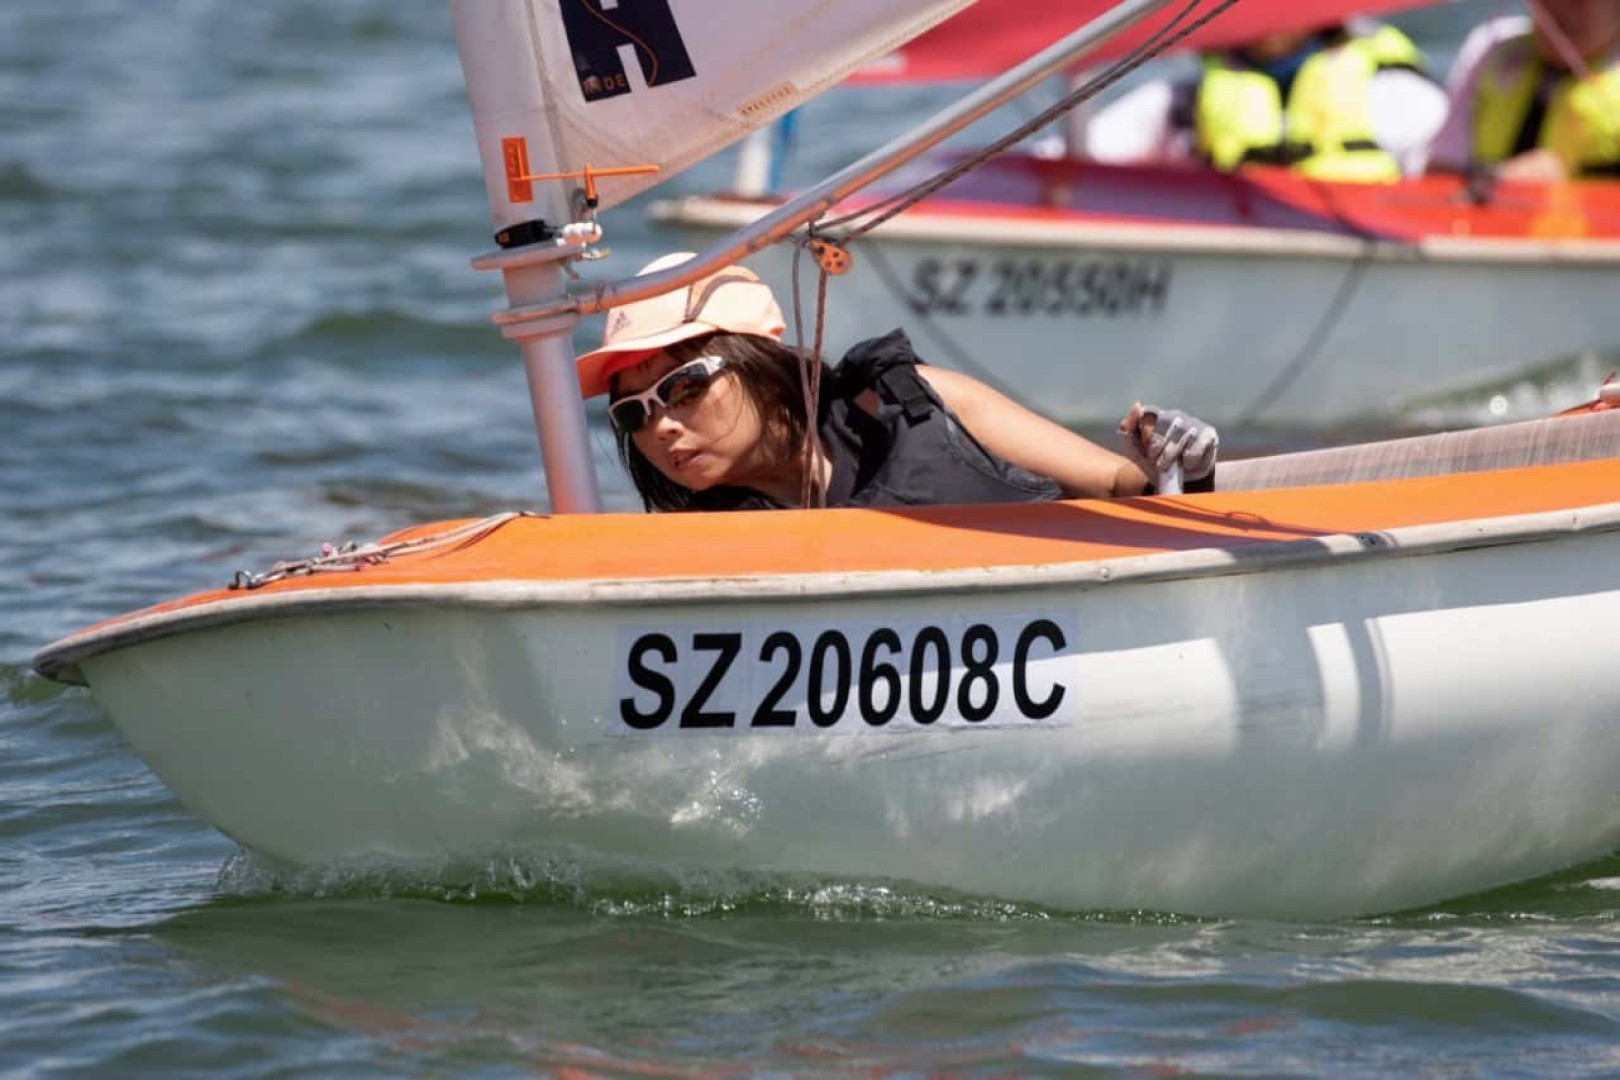 Inaugural RSYC Metazone Inclusive Cup shows the potential for Para Sailing in Asia